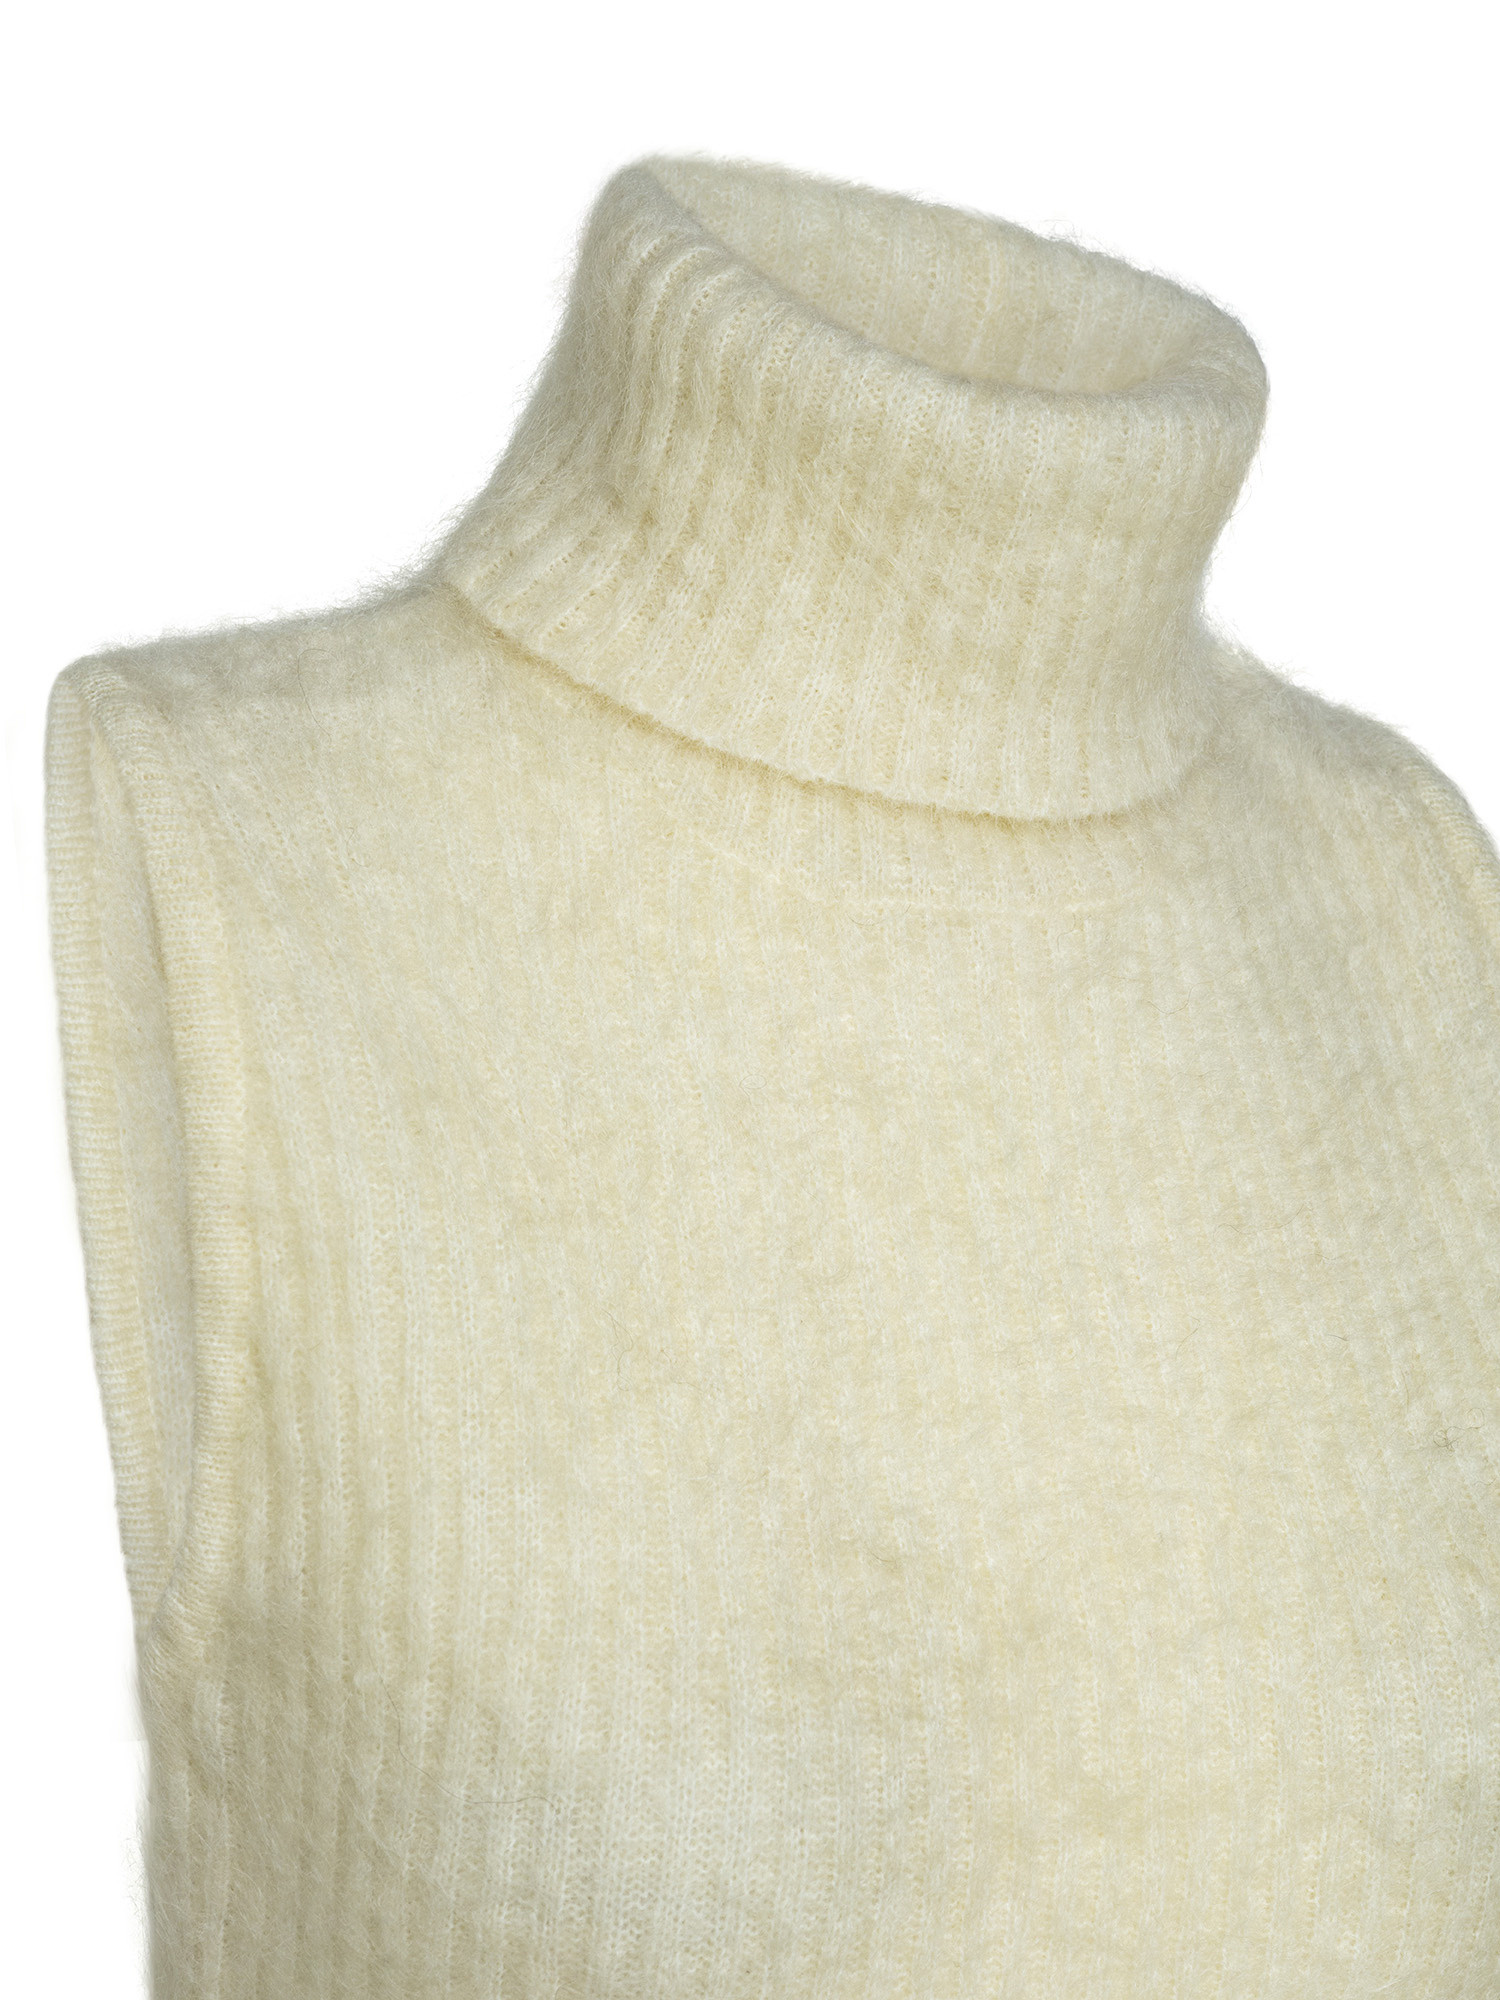 Fitted knit top in mohair wool blend, Beige, large image number 2